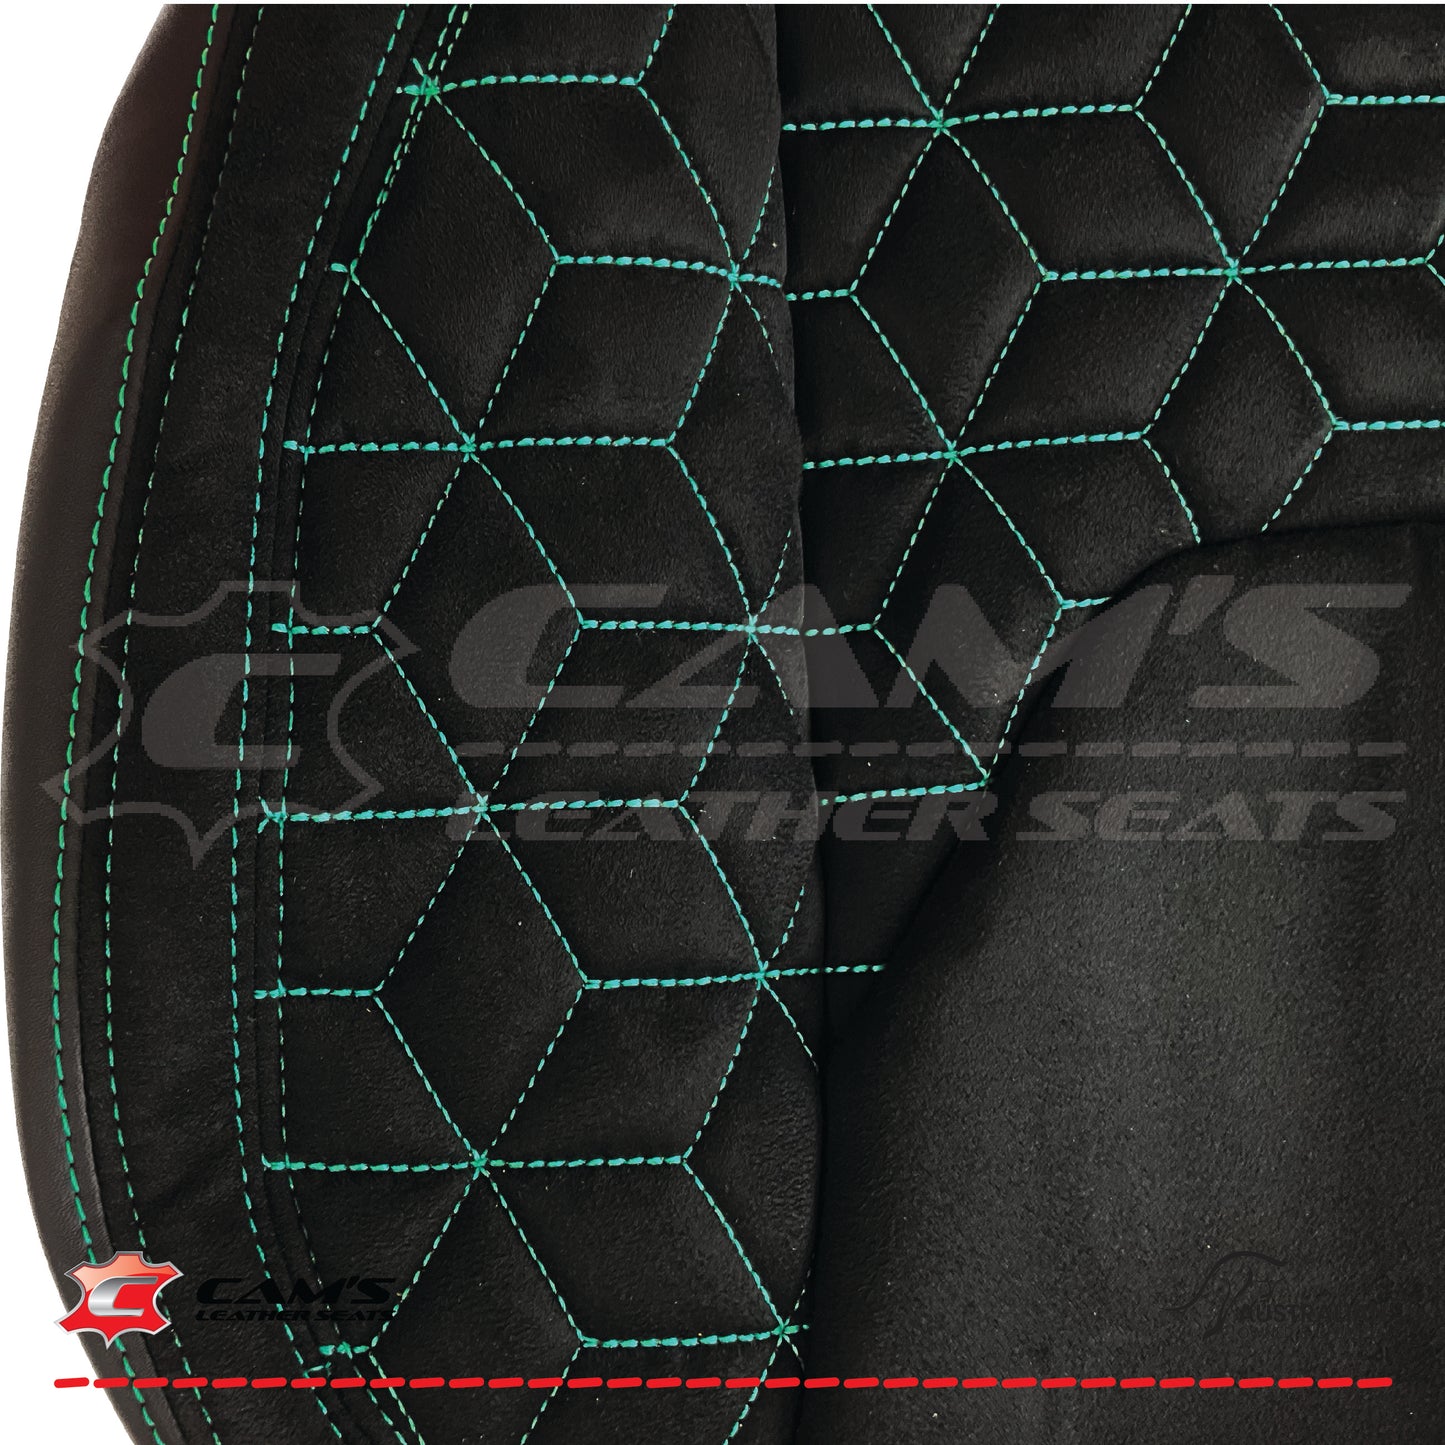 LEATHER SEATS TRIM KIT FOR HOLDEN HSV VF GTS 2 SEATS BLACK SUEDE WITH TEAL STITCH